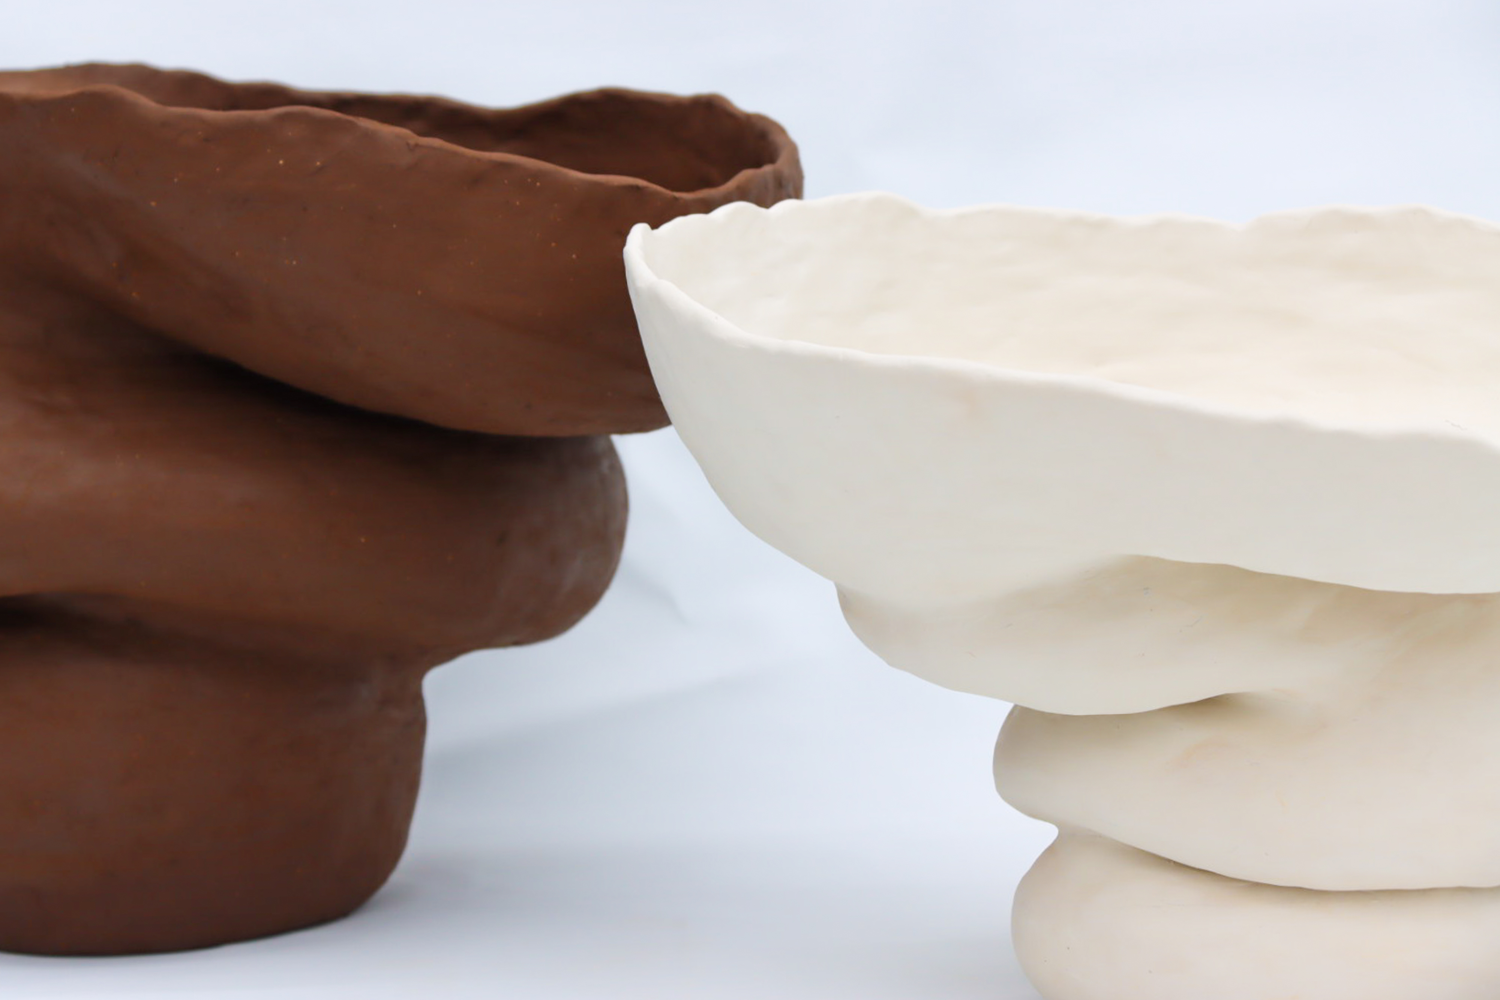 Close up image of two large voluptuous ceramic forms lined up in front of a white backdrop, coloured from left to right, dark brown and white.